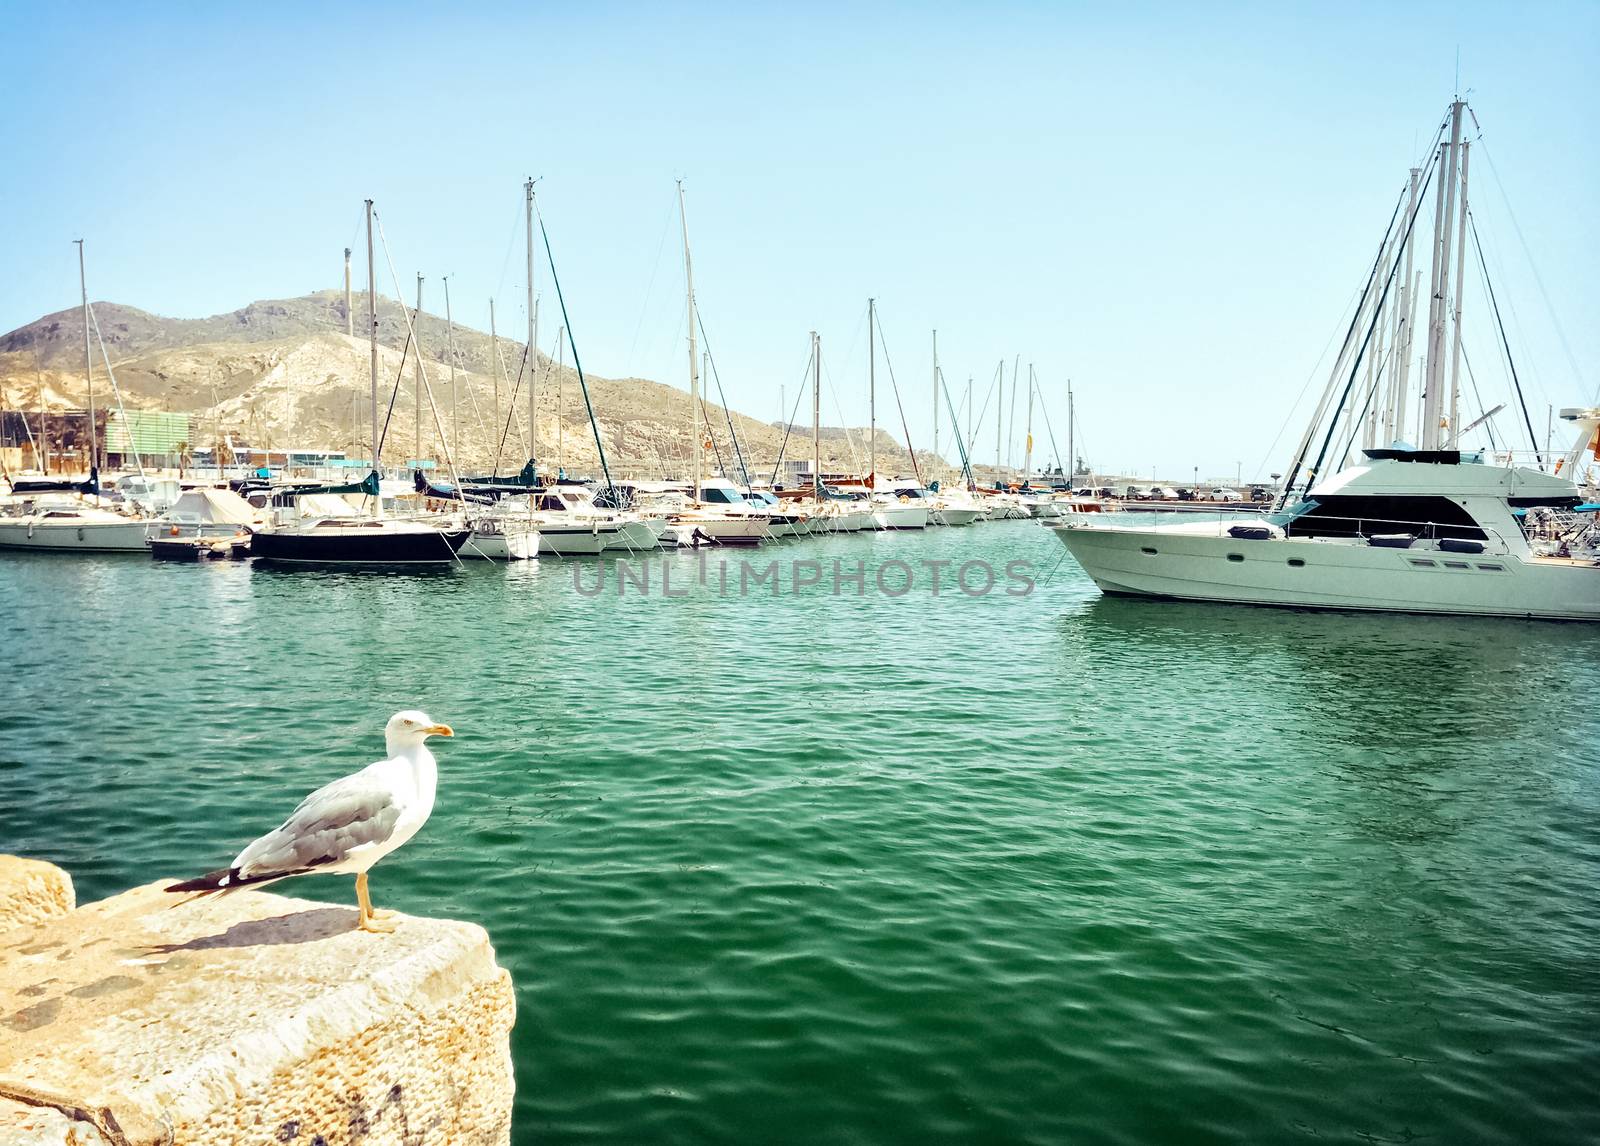 Boats in the old port of Cartagena, Spain.